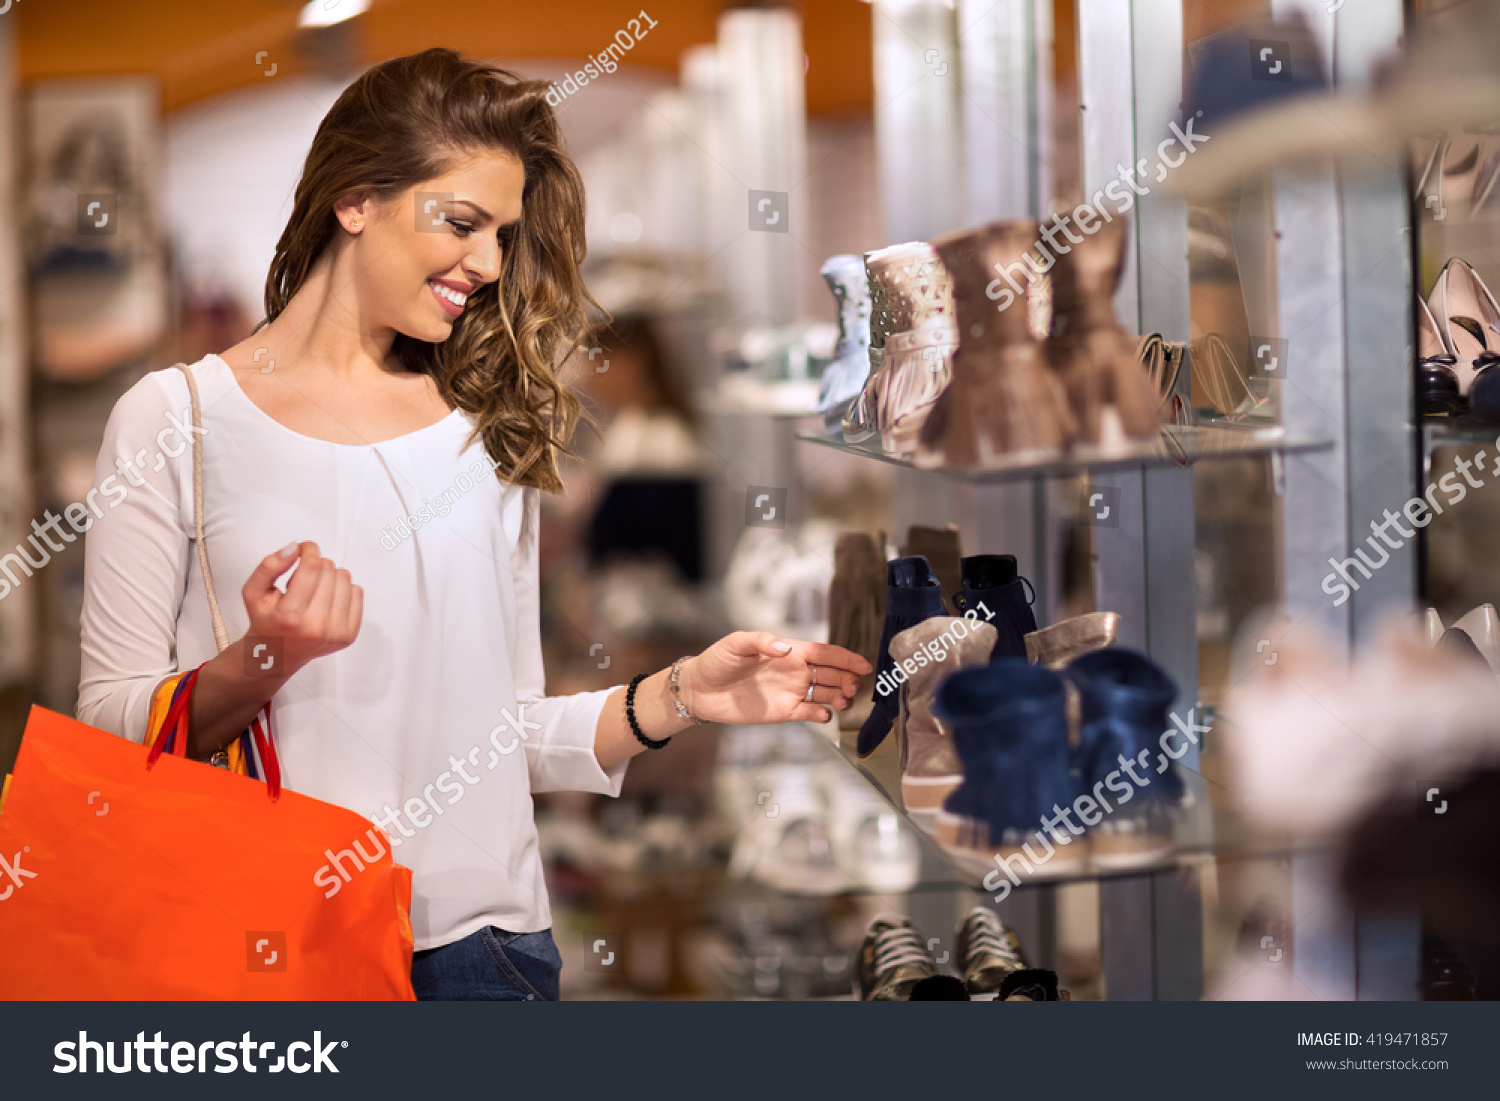 Smiling attractive young women shopping at shoes store #419471857